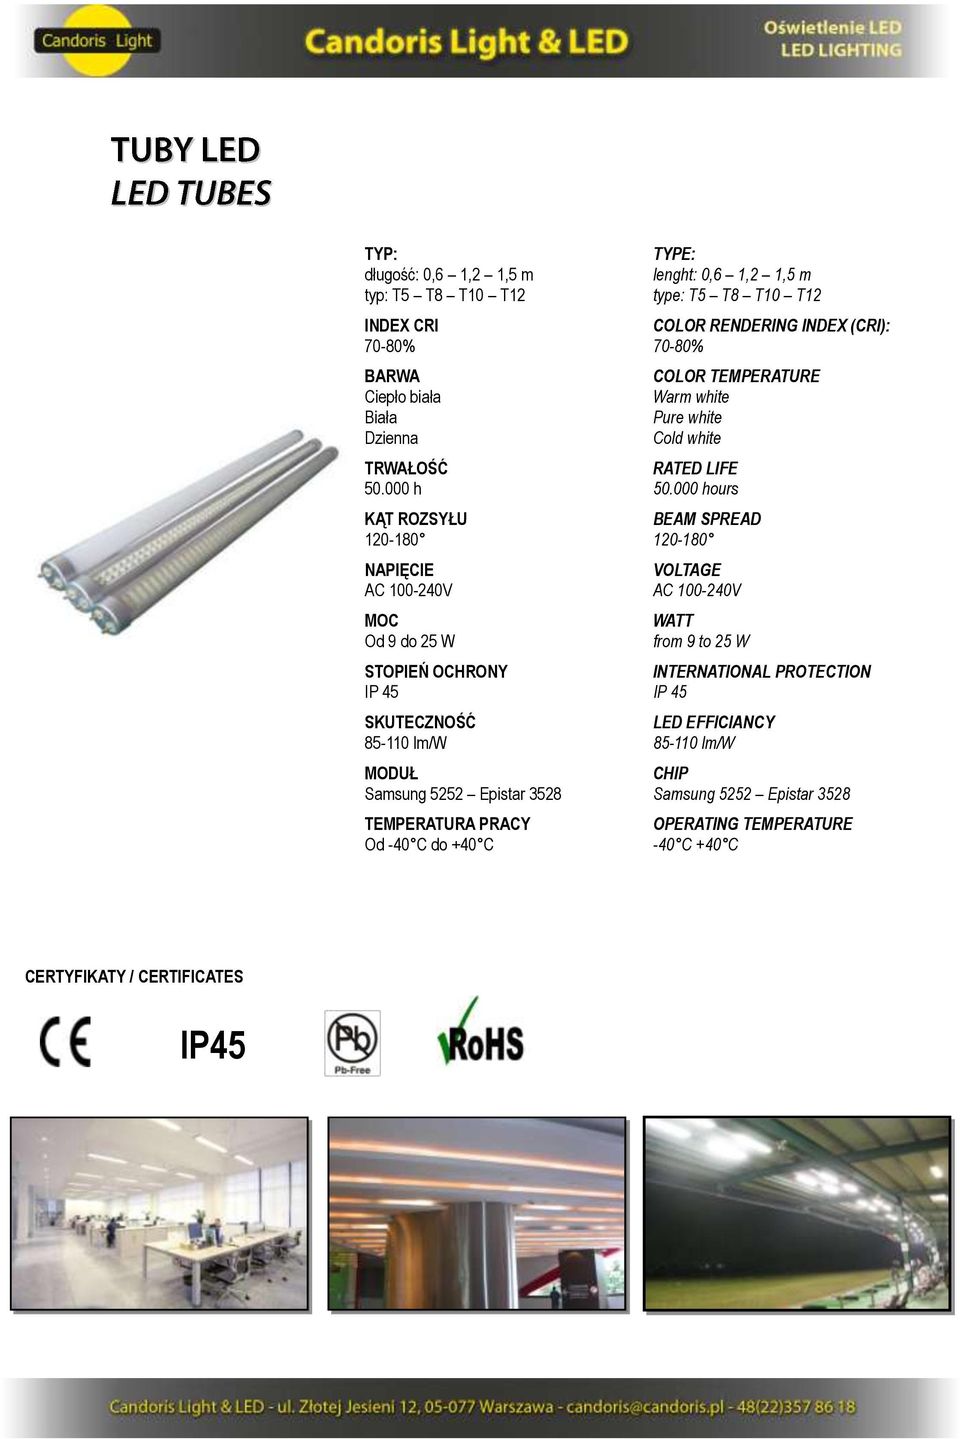 T5 T8 T10 T12 70-80% Warm white Pure white Cold white ours 120-180 AC 100-240V from 9 to 25 W IP